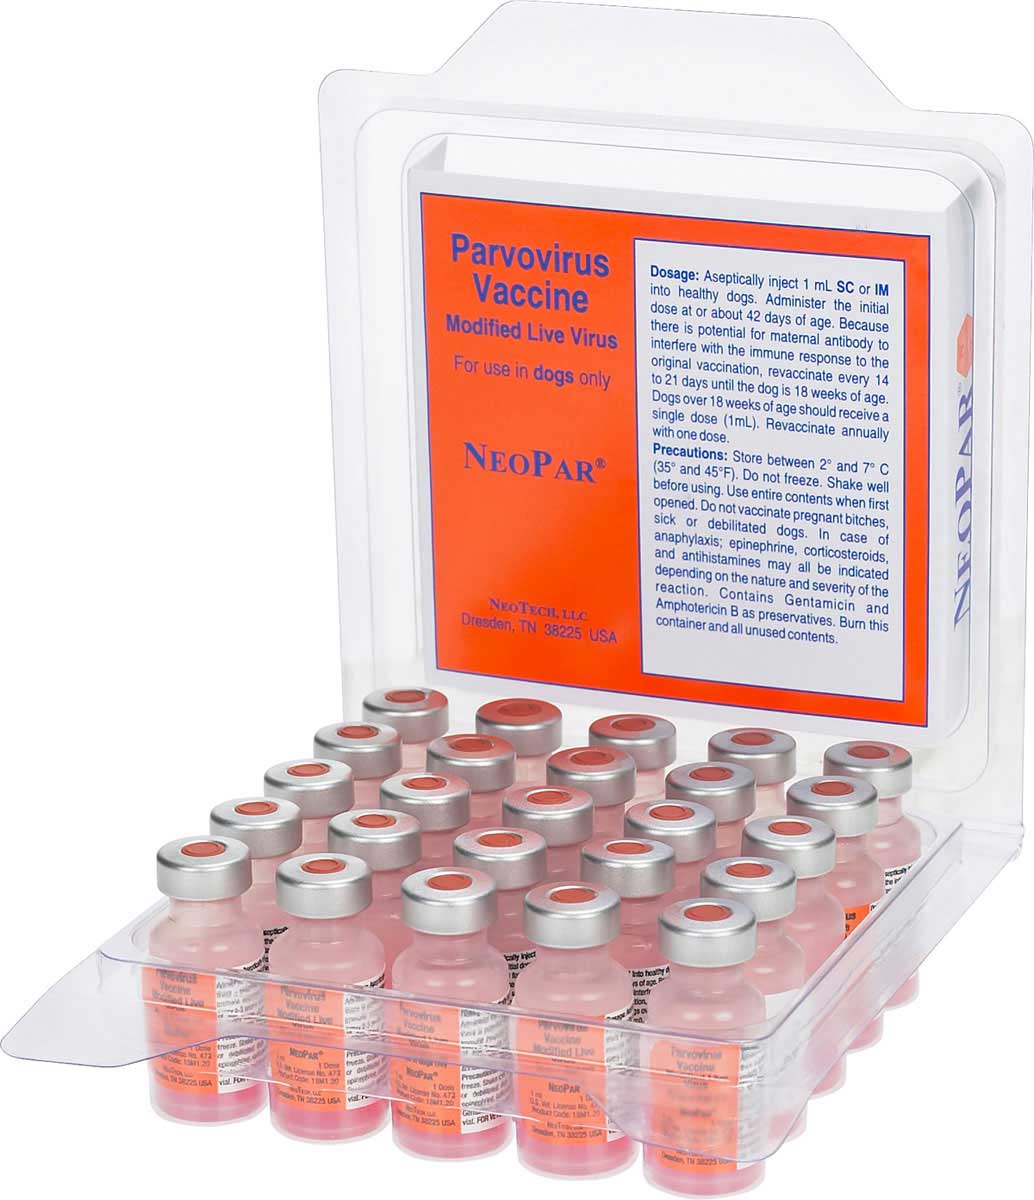 what is the neopar vaccine